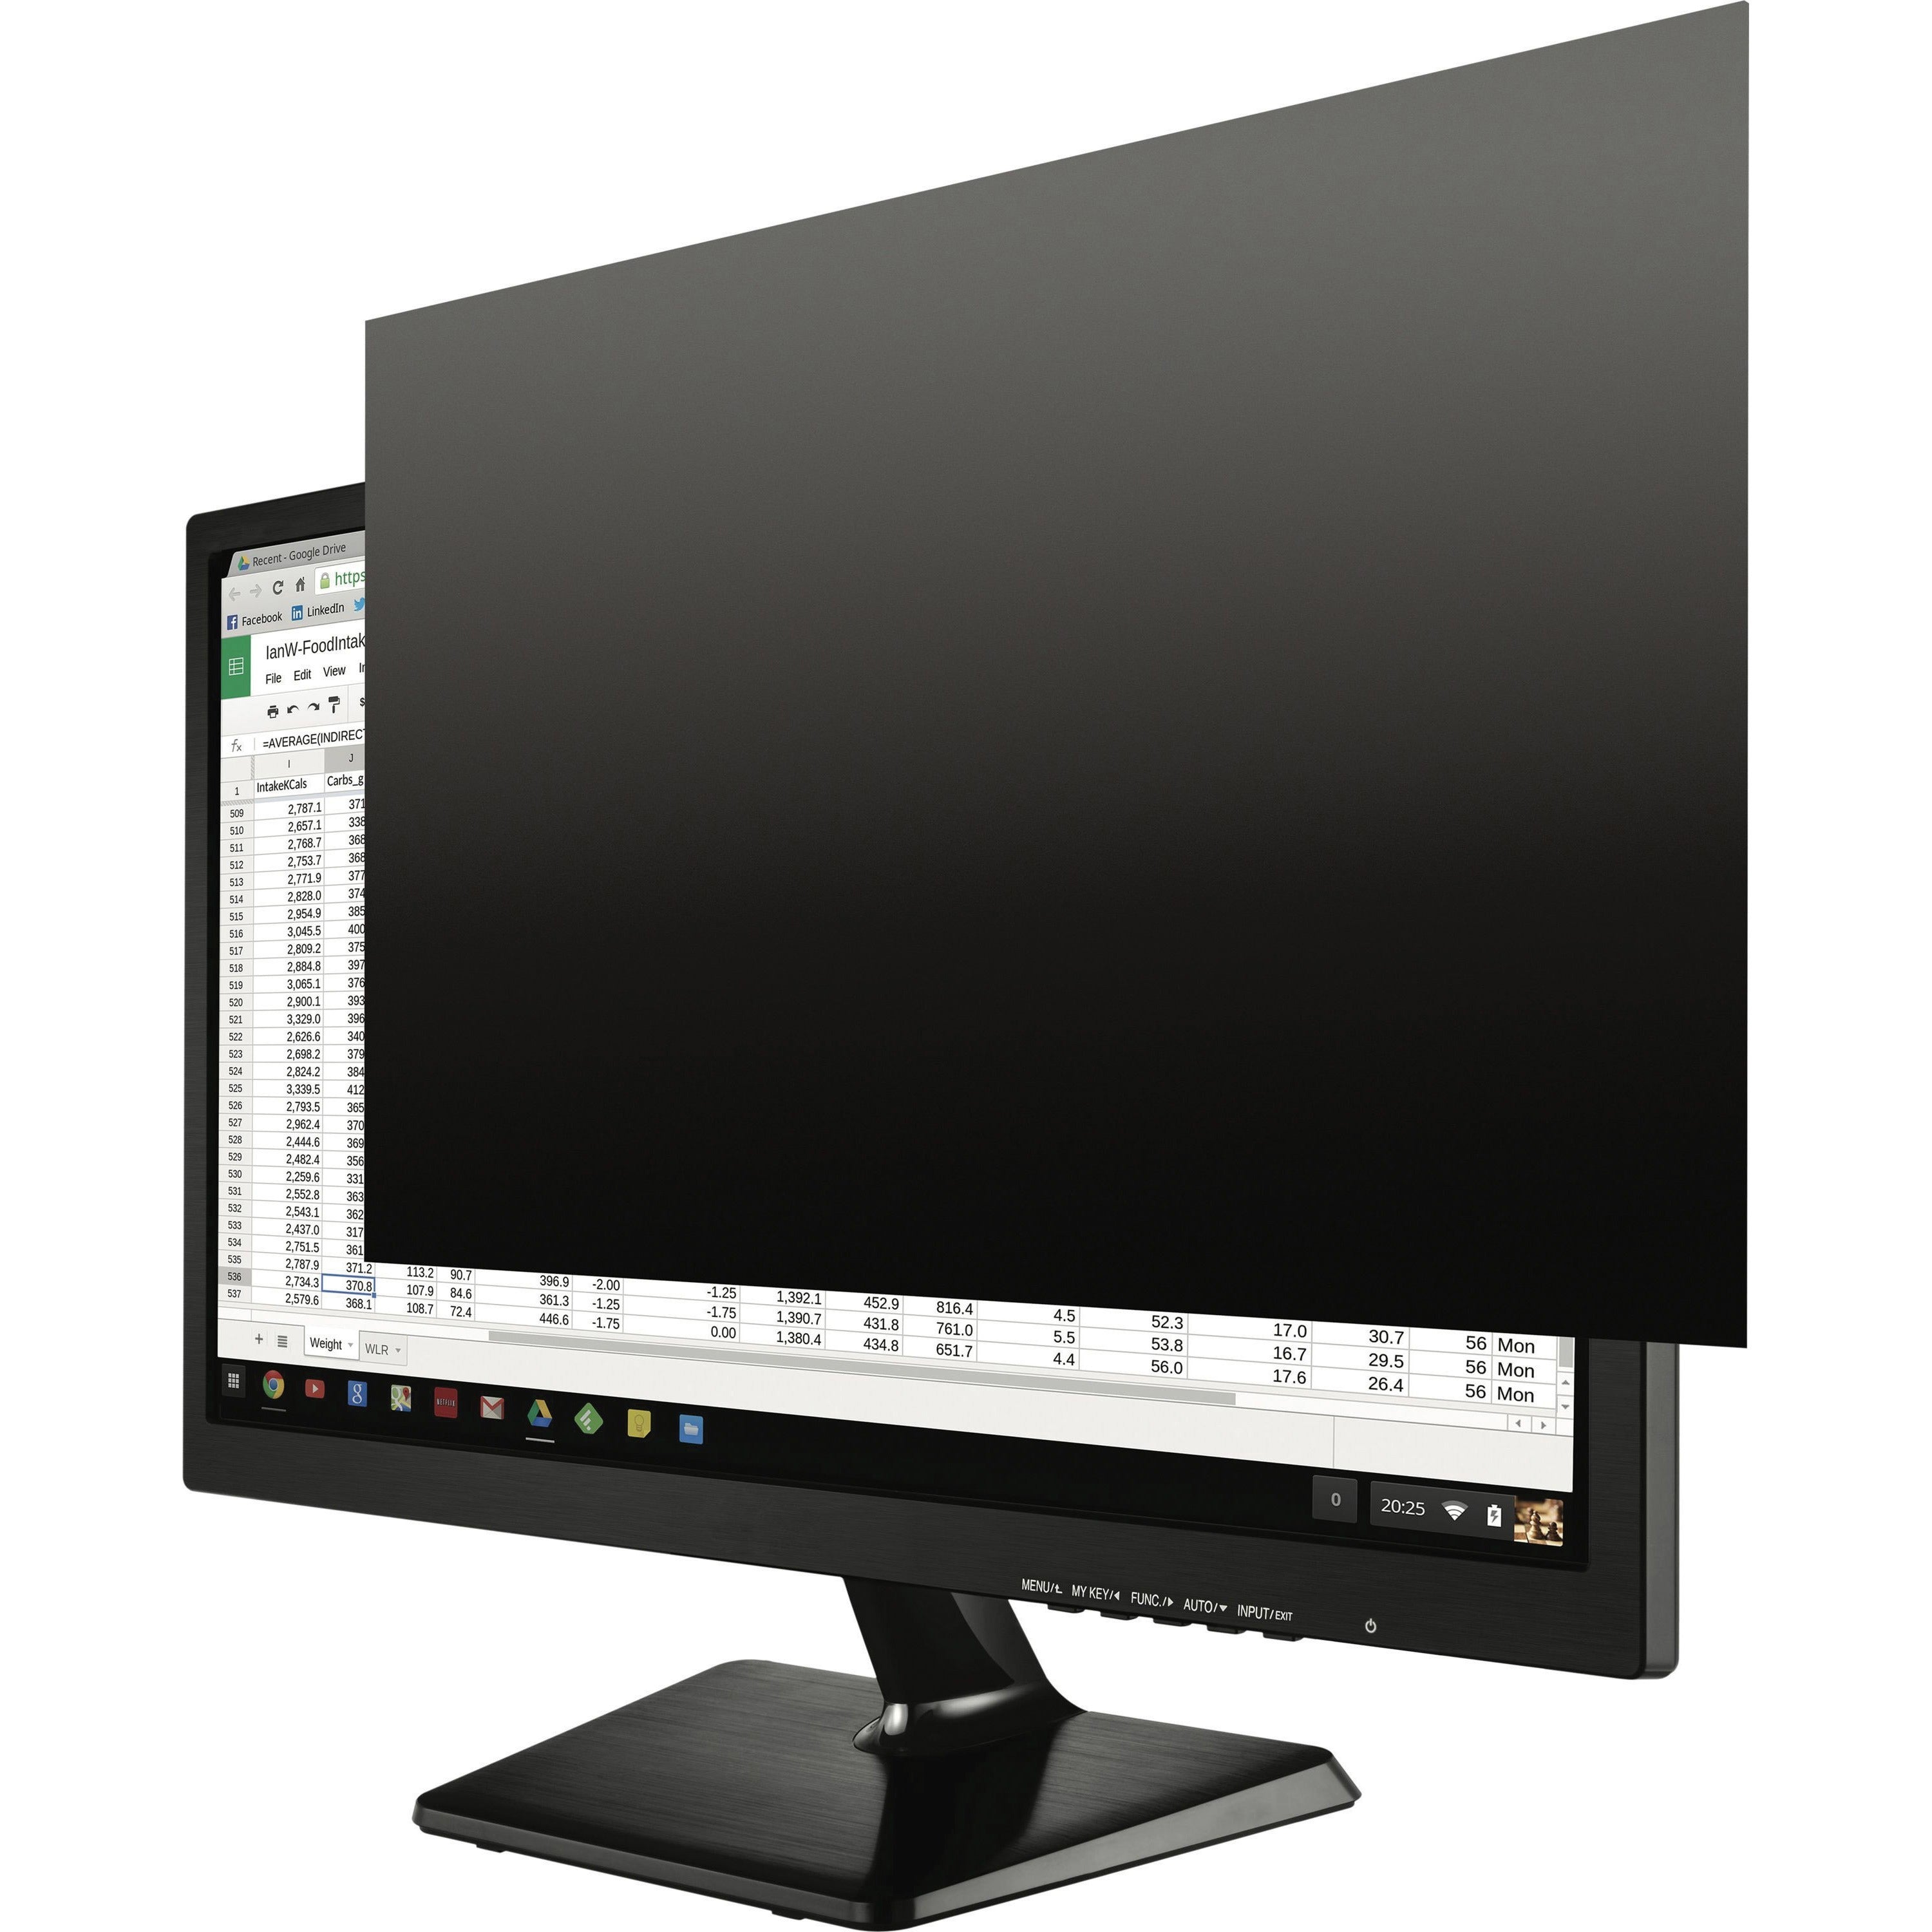 Kantek Secure-View Blackout Privacy Filter - Fits 19" Widescreen LCD Monitors Black - For 19" Widescreen Notebook, Monitor - Damage Resistant - Anti-glare - 1 Pack - 